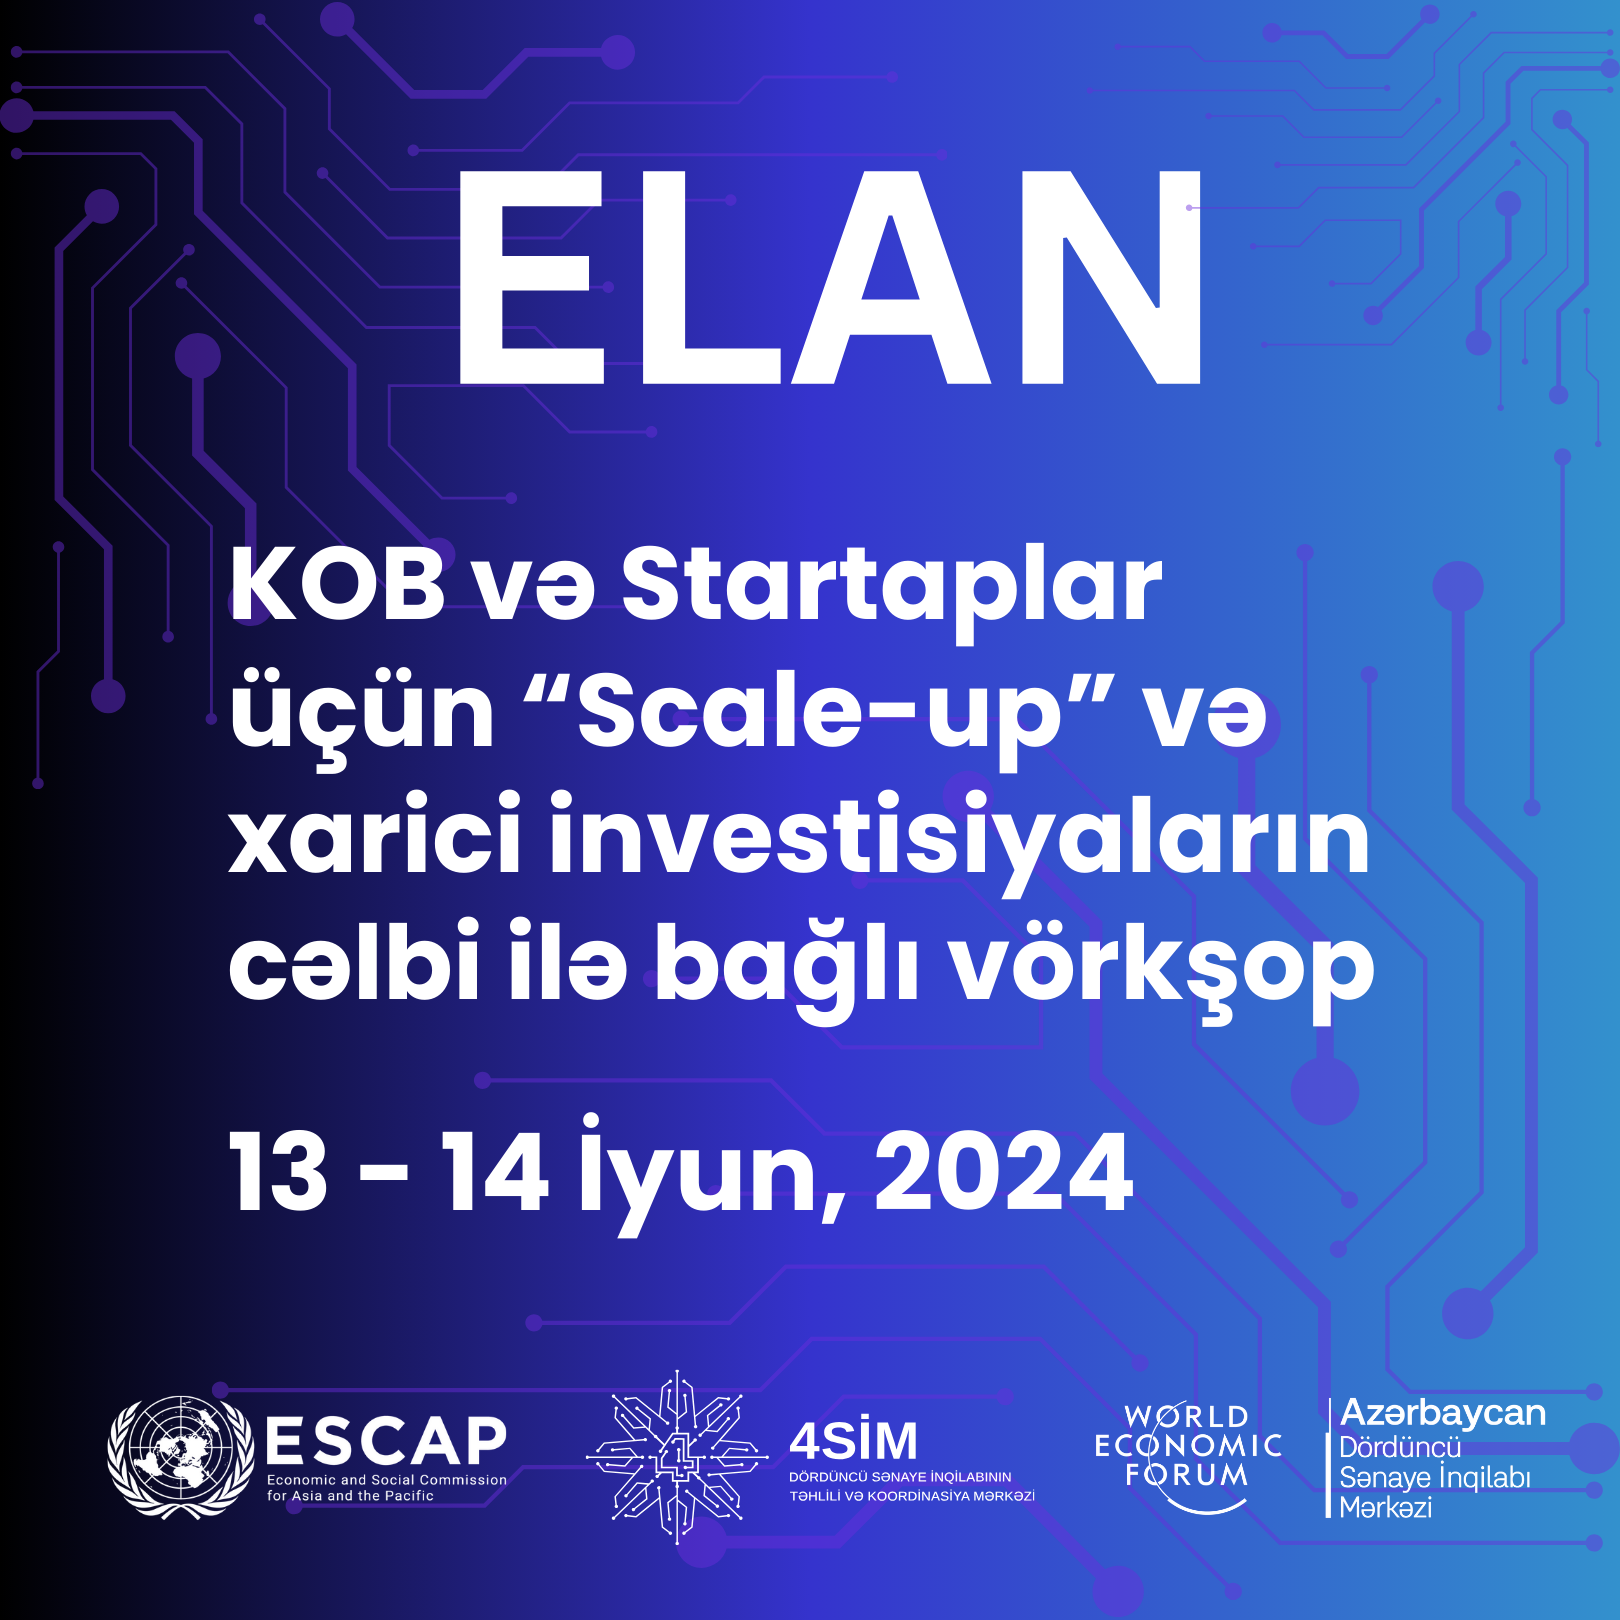 KOB and Startup poster